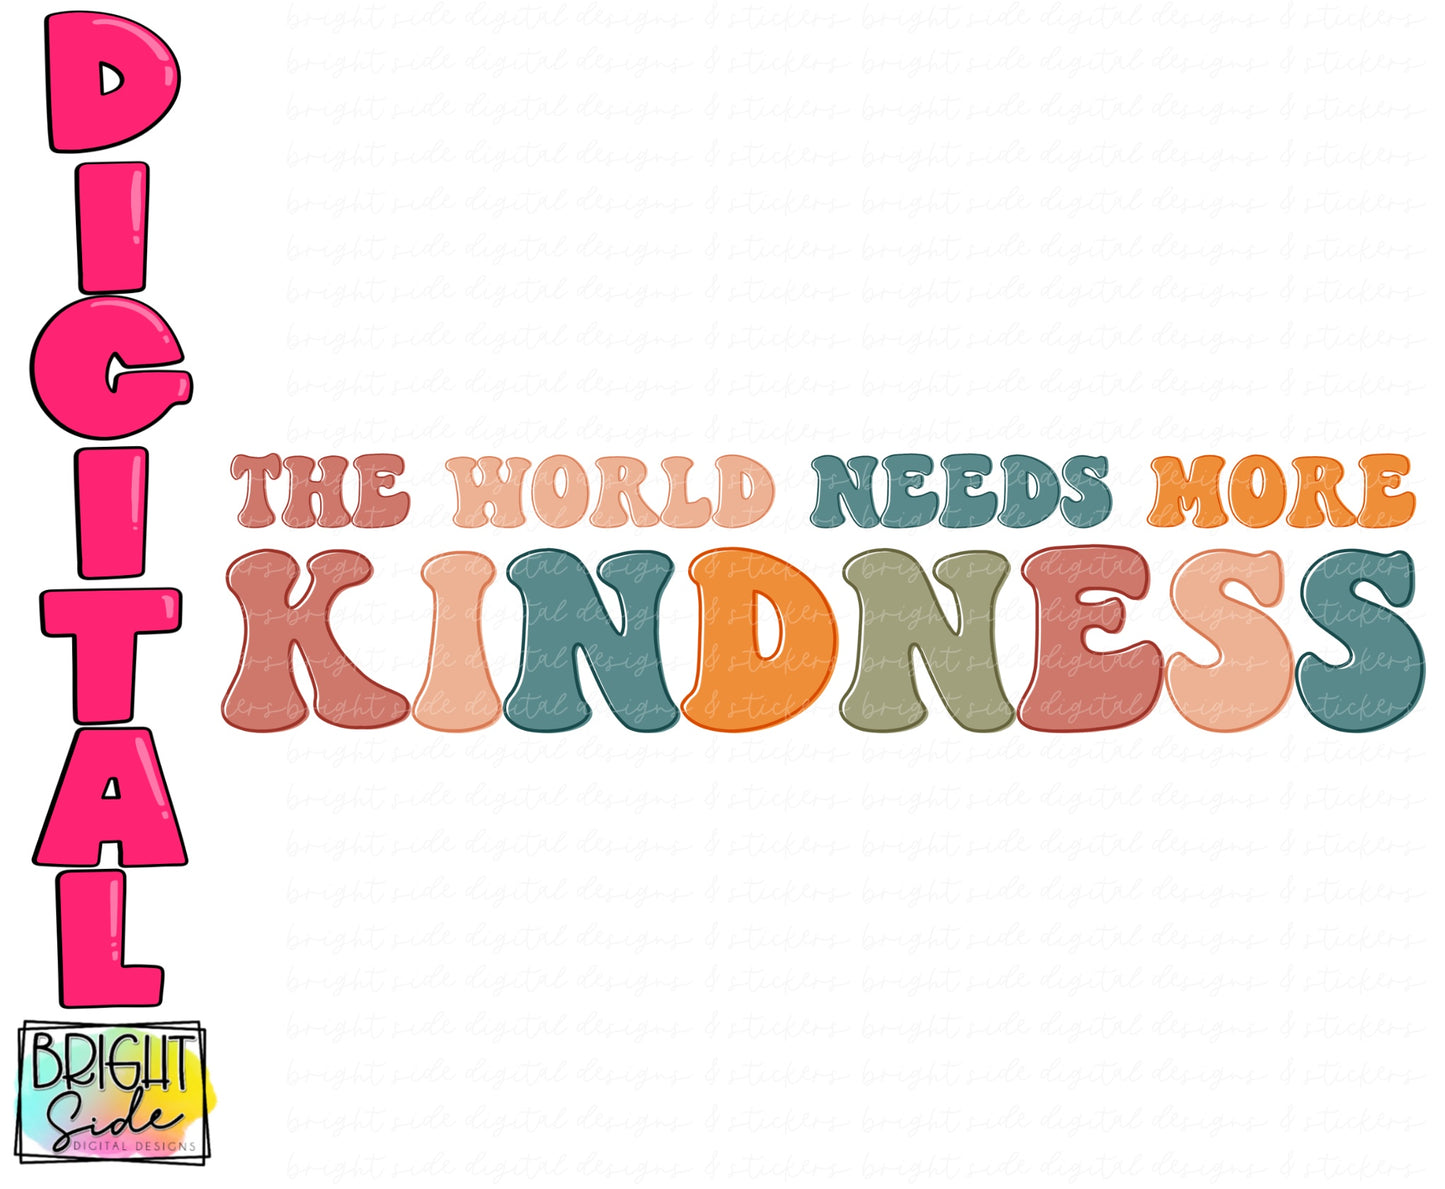 The world needs more kindness